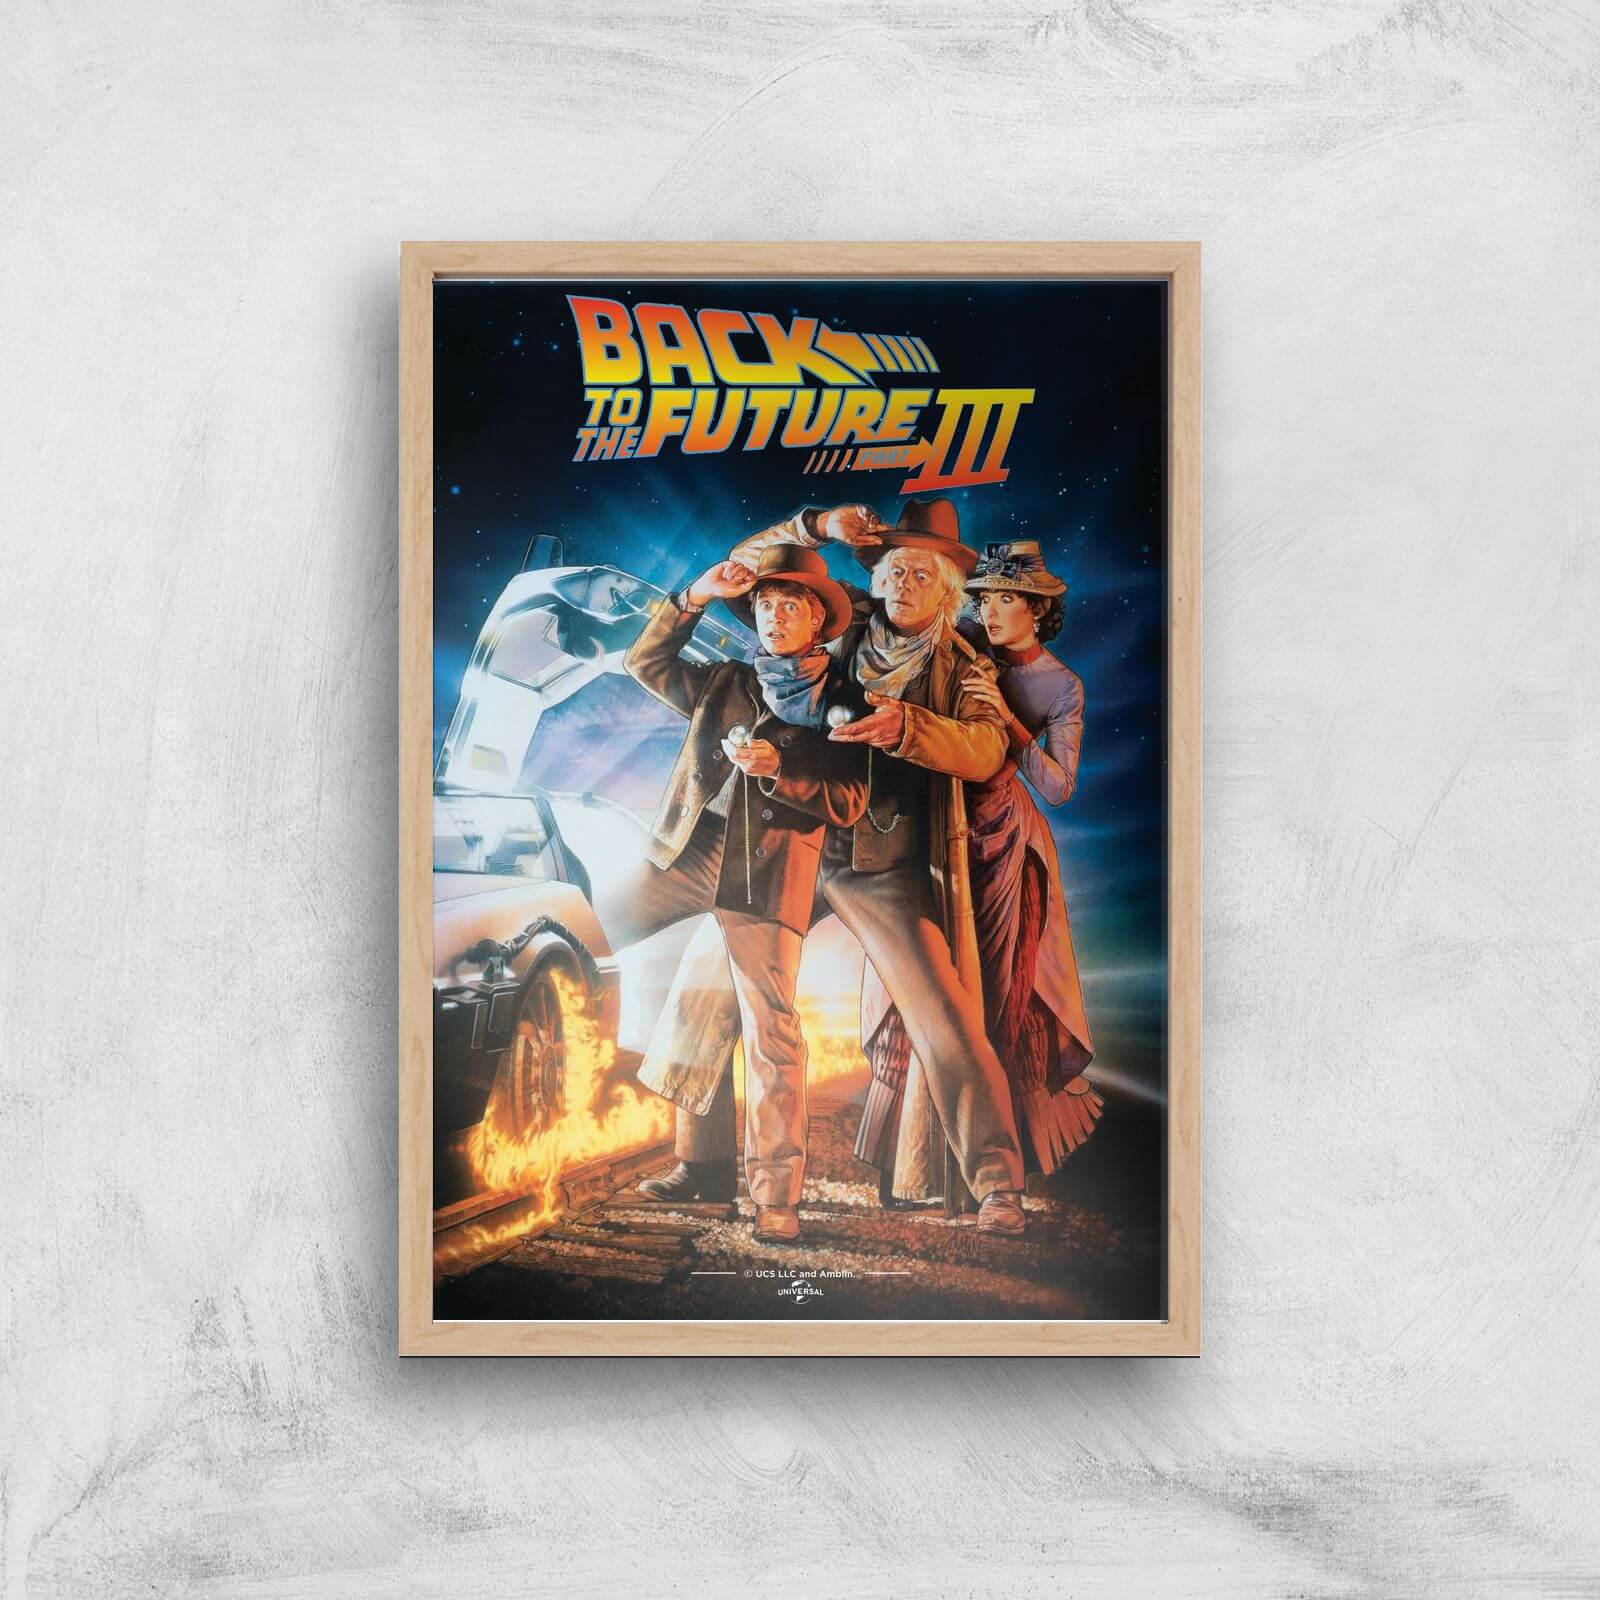 Back To The Future Part 3 Giclee Art Print - A2 - Wooden Frame